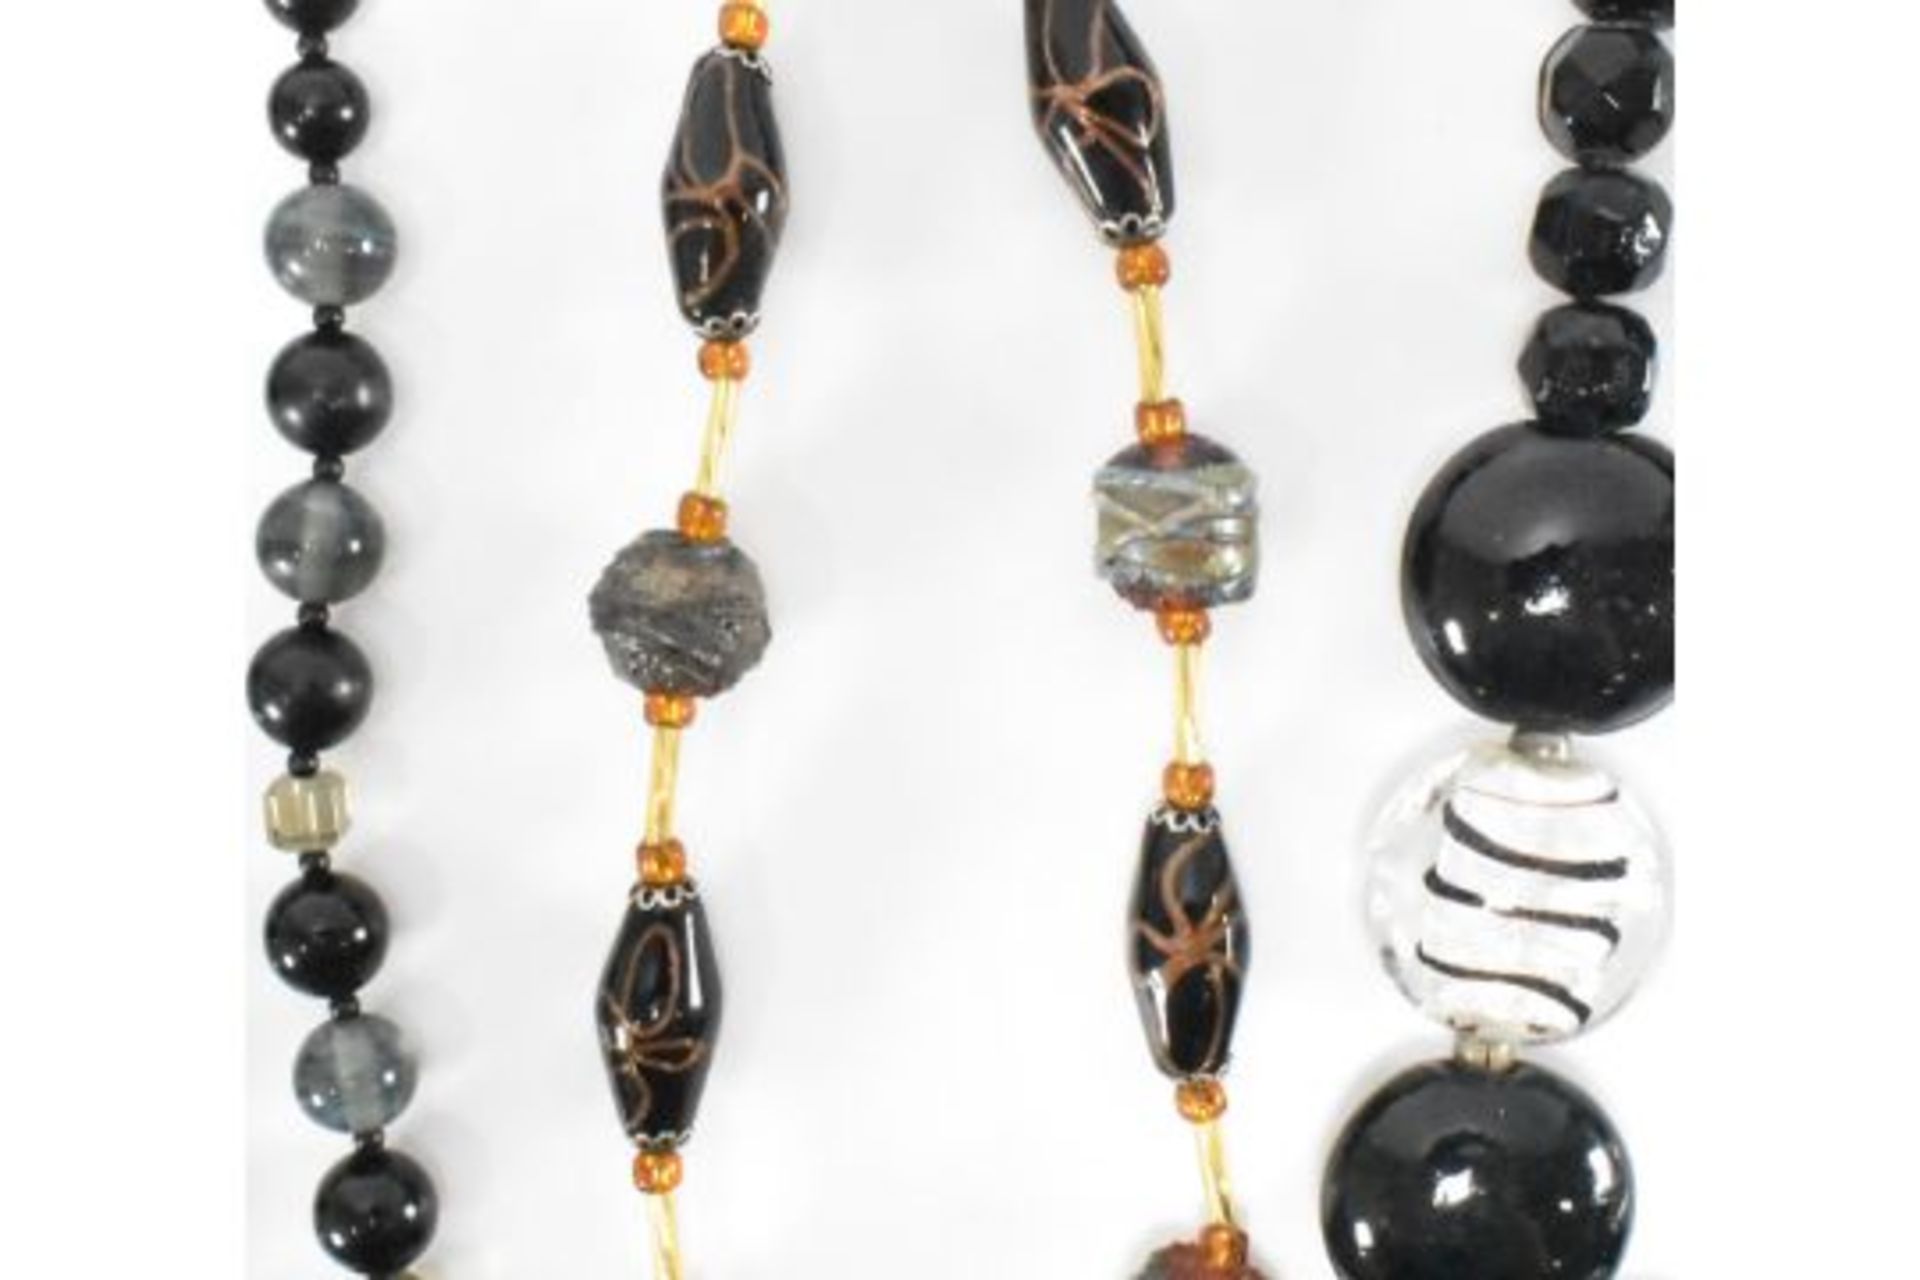 GROUP OF VINTAGE GLASS BEAD NECKLACES - Image 5 of 7